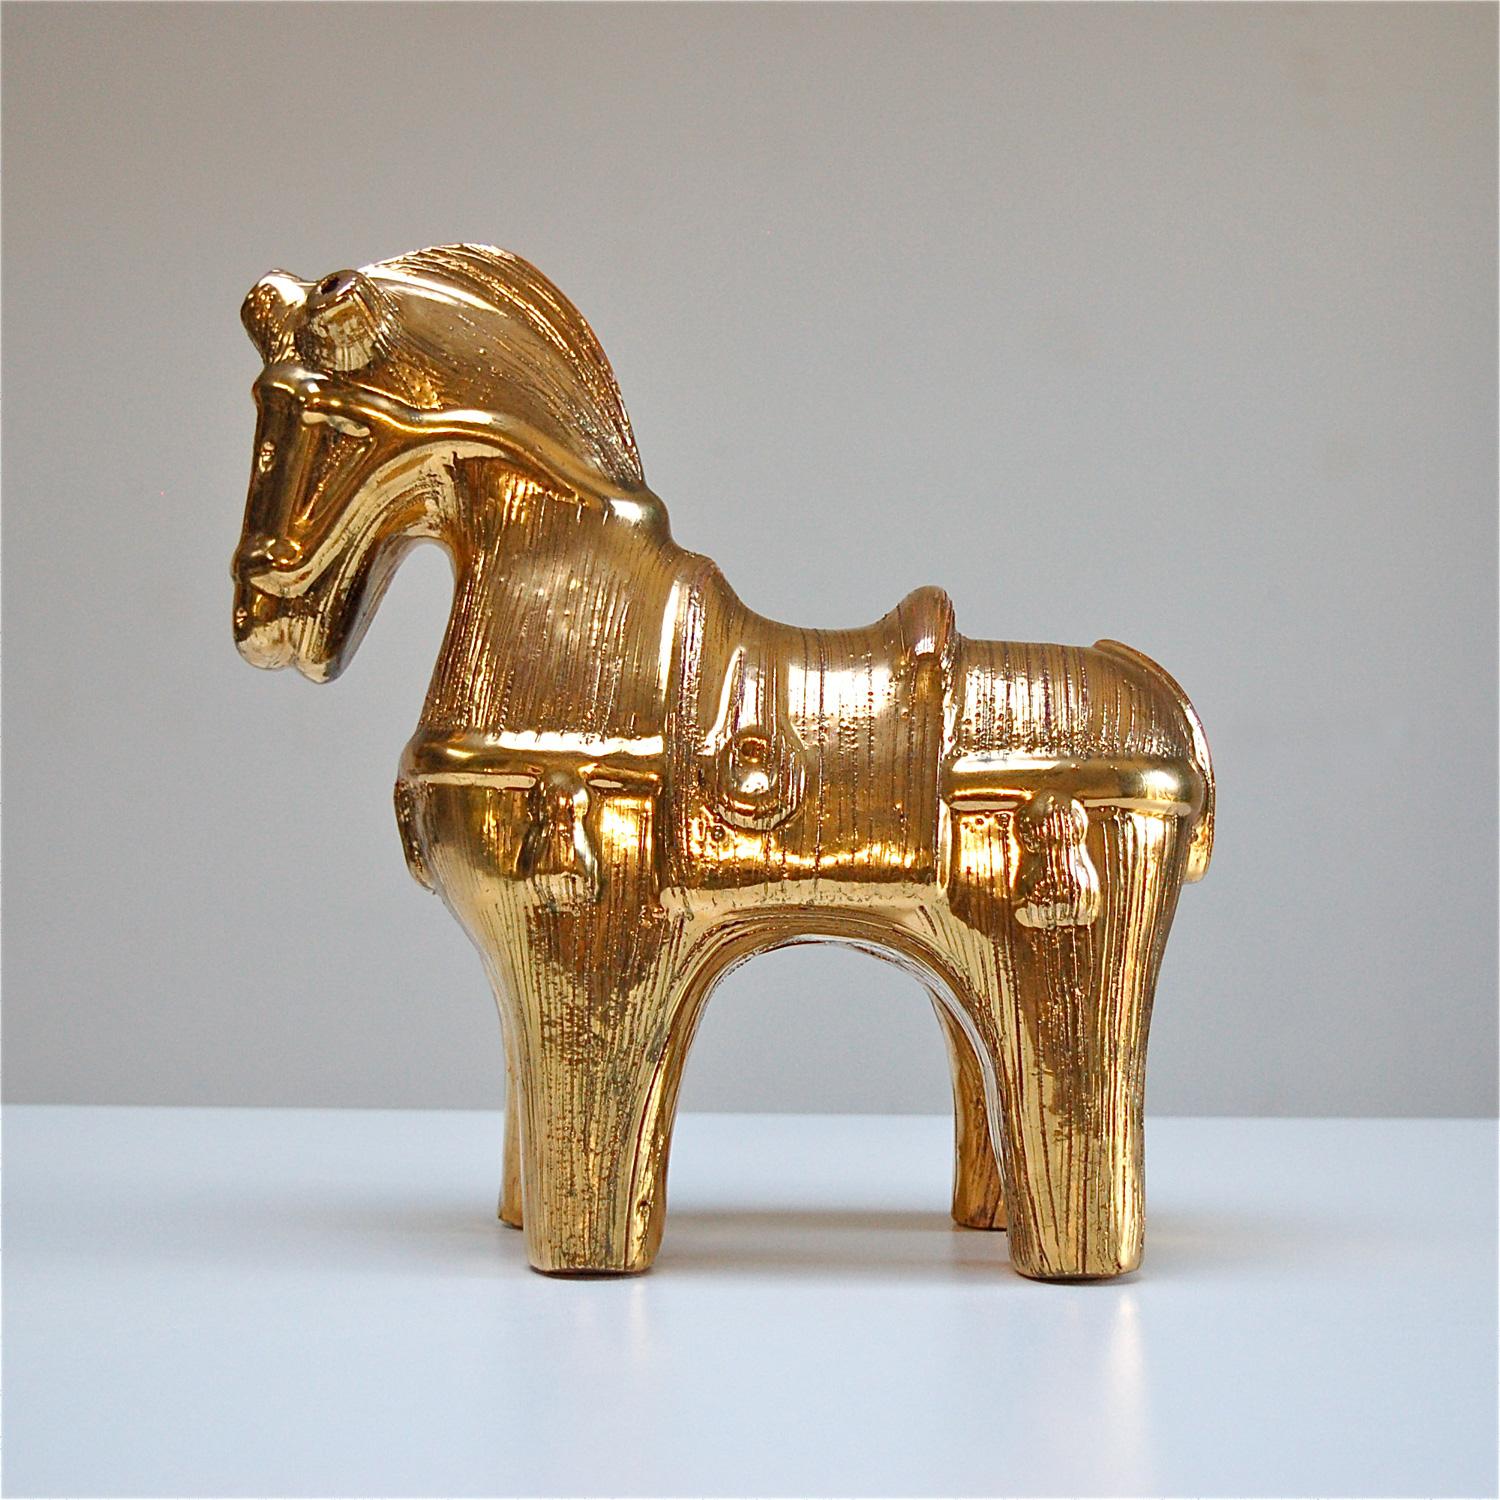 Italian Ceramic Horse Sculpture by Bitossi in Gilt Glaze, Italy, 1960s For Sale